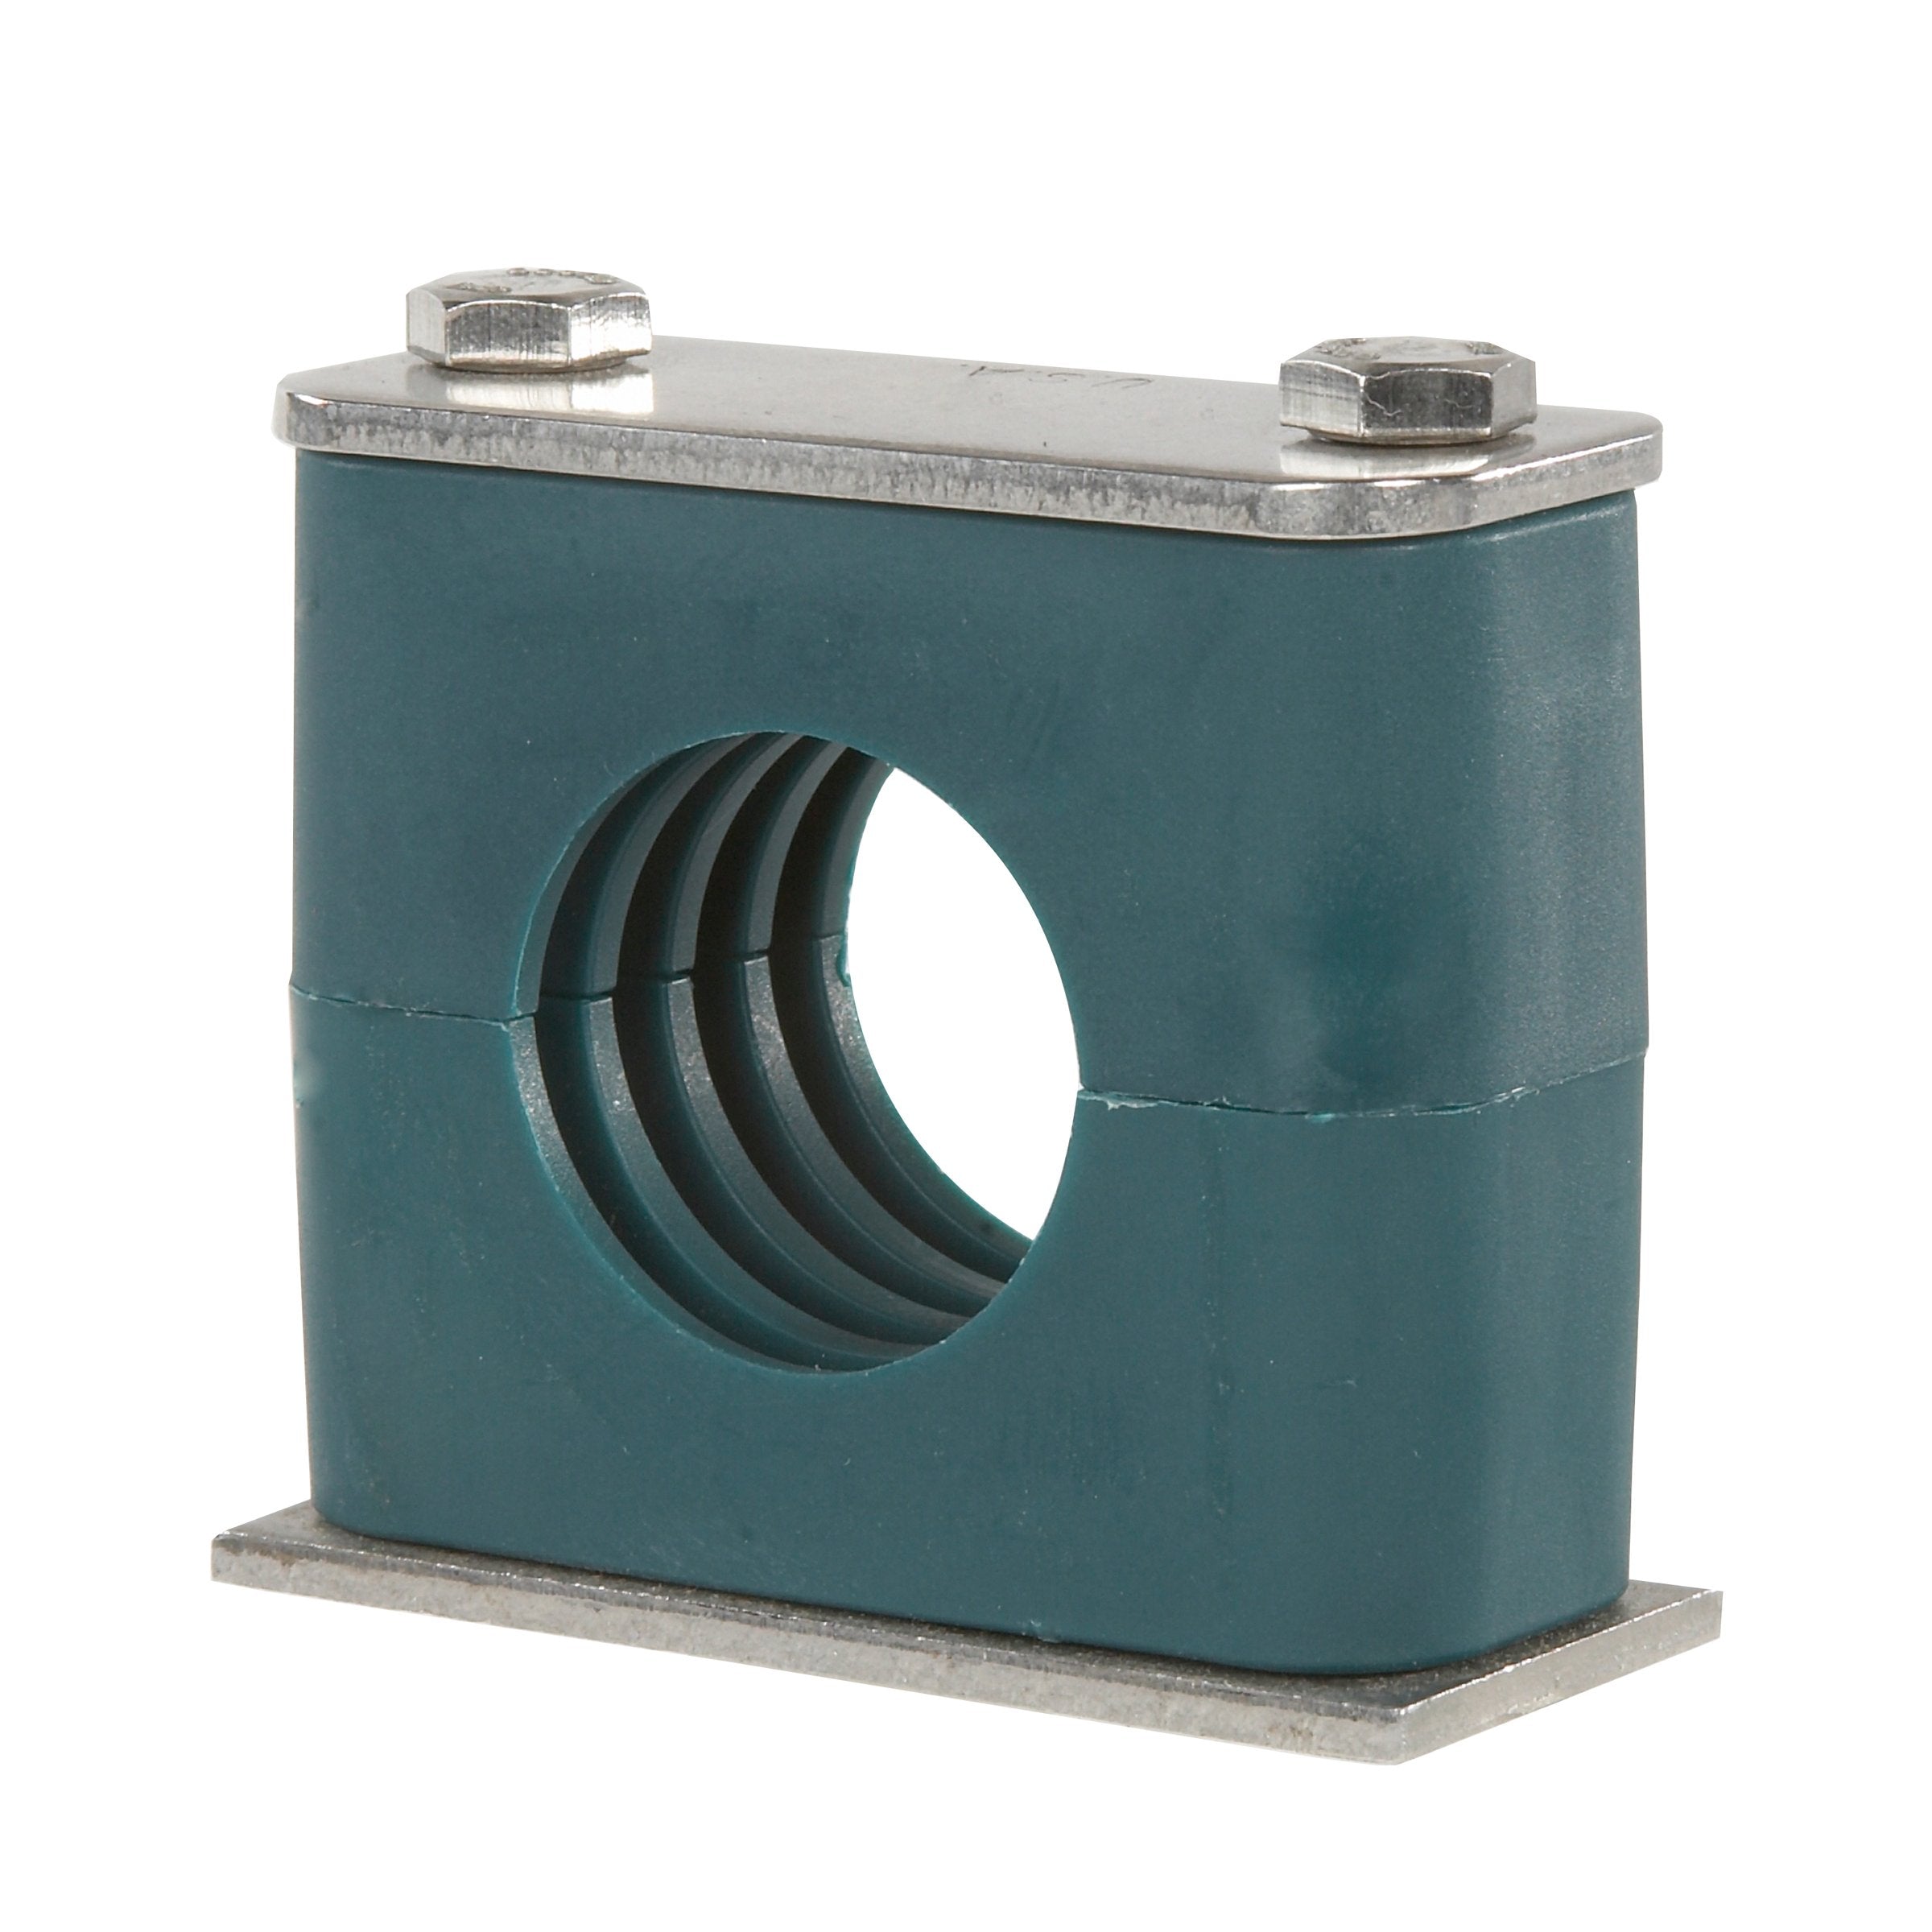 SP-770-PP-DP-AS-U-W5 : Stauff Clamp, Single Weld Plate, 2.75 inch (70mm) OD, for 2.75" Tube, Green PP Insert, Profiled Interior, 316SS